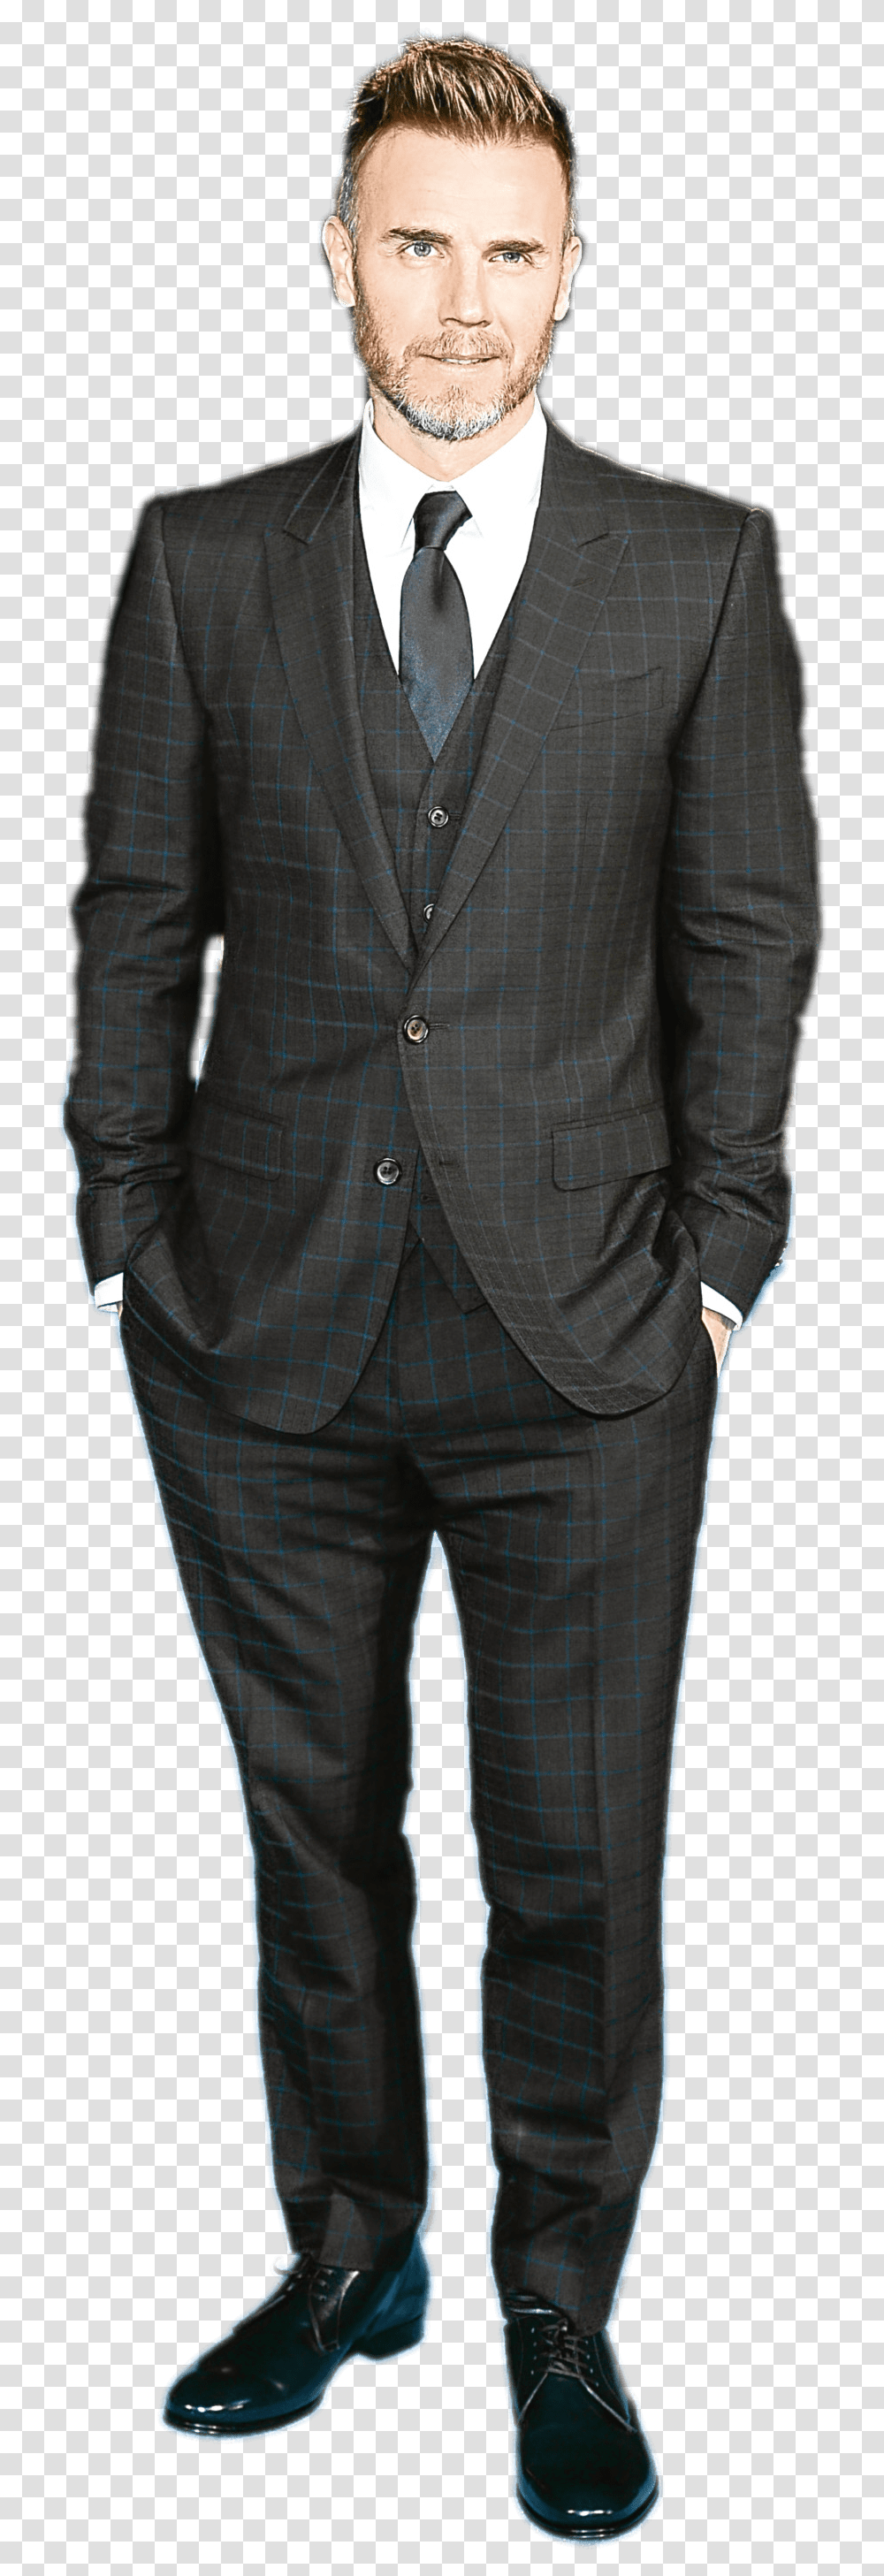 Gary Barlow Full Size Comfort Fit Suit, Overcoat, Person, Man Transparent Png